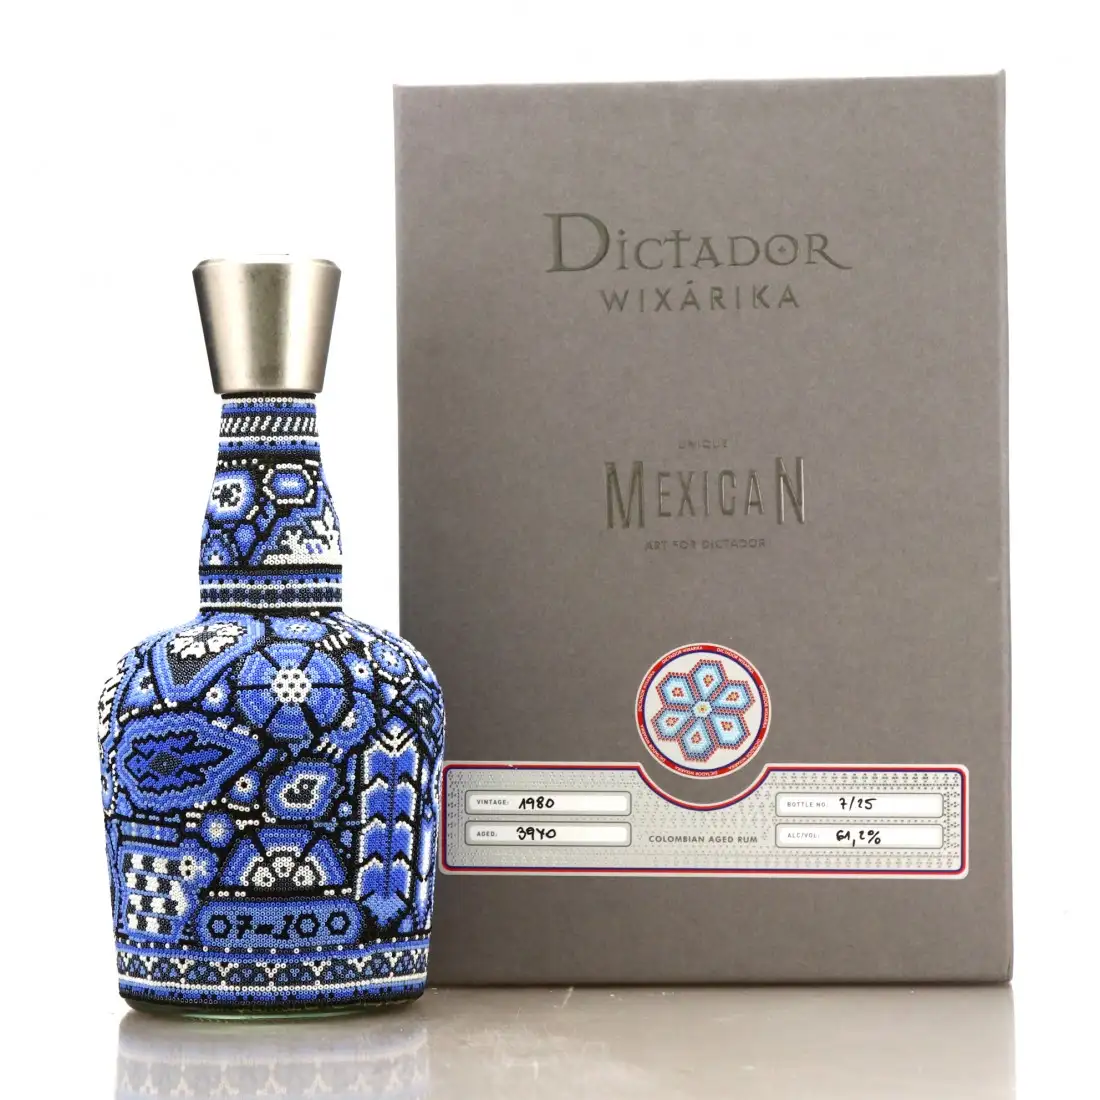 Image of the front of the bottle of the rum Dictador Wixarika